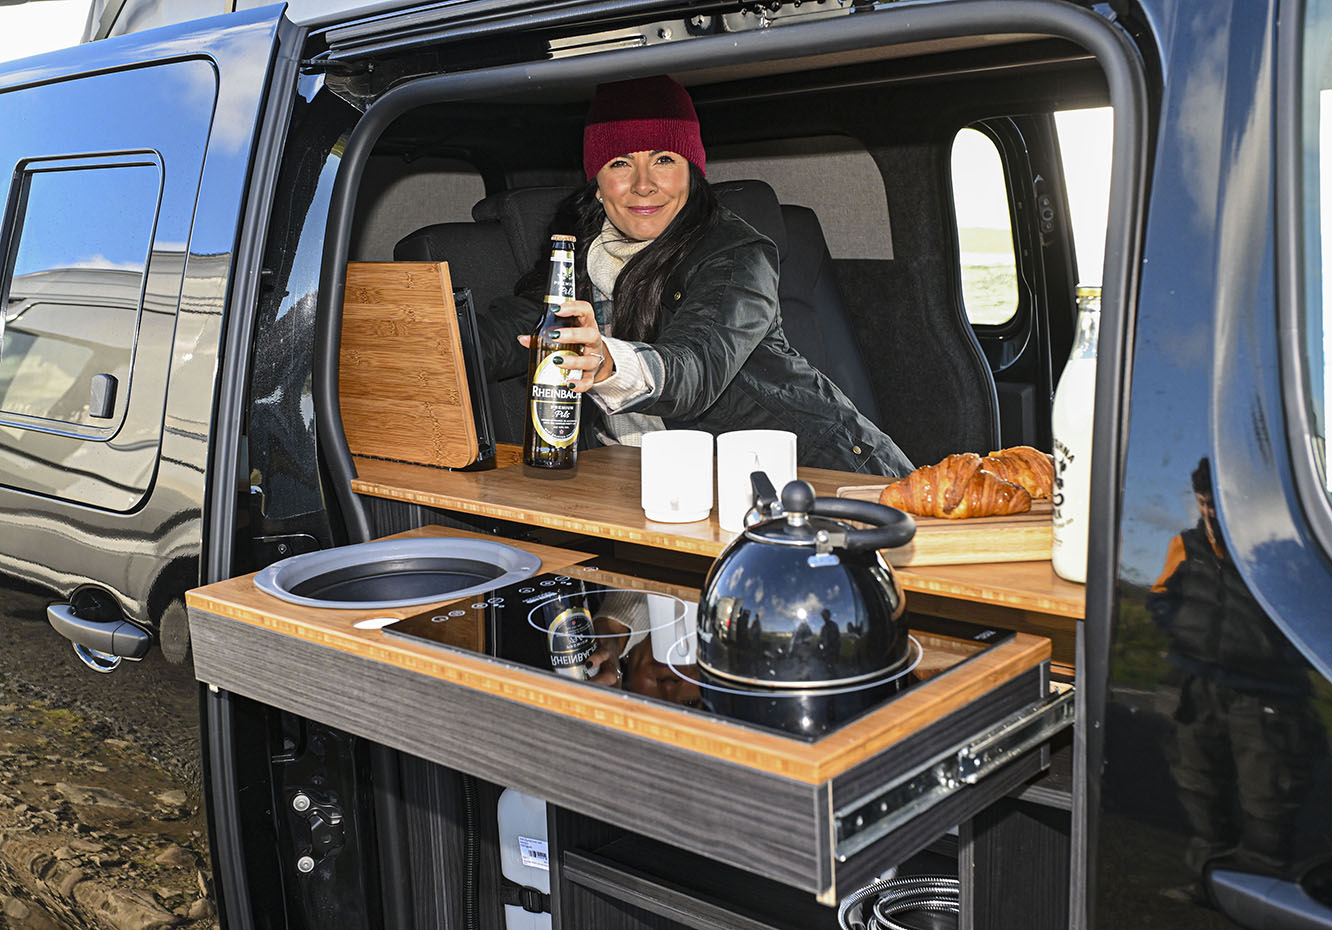 The Vanderlust Vivaro e Campers funky functionality fit out comes with flair including a top loading fridge and an indoor outdoor induction hob